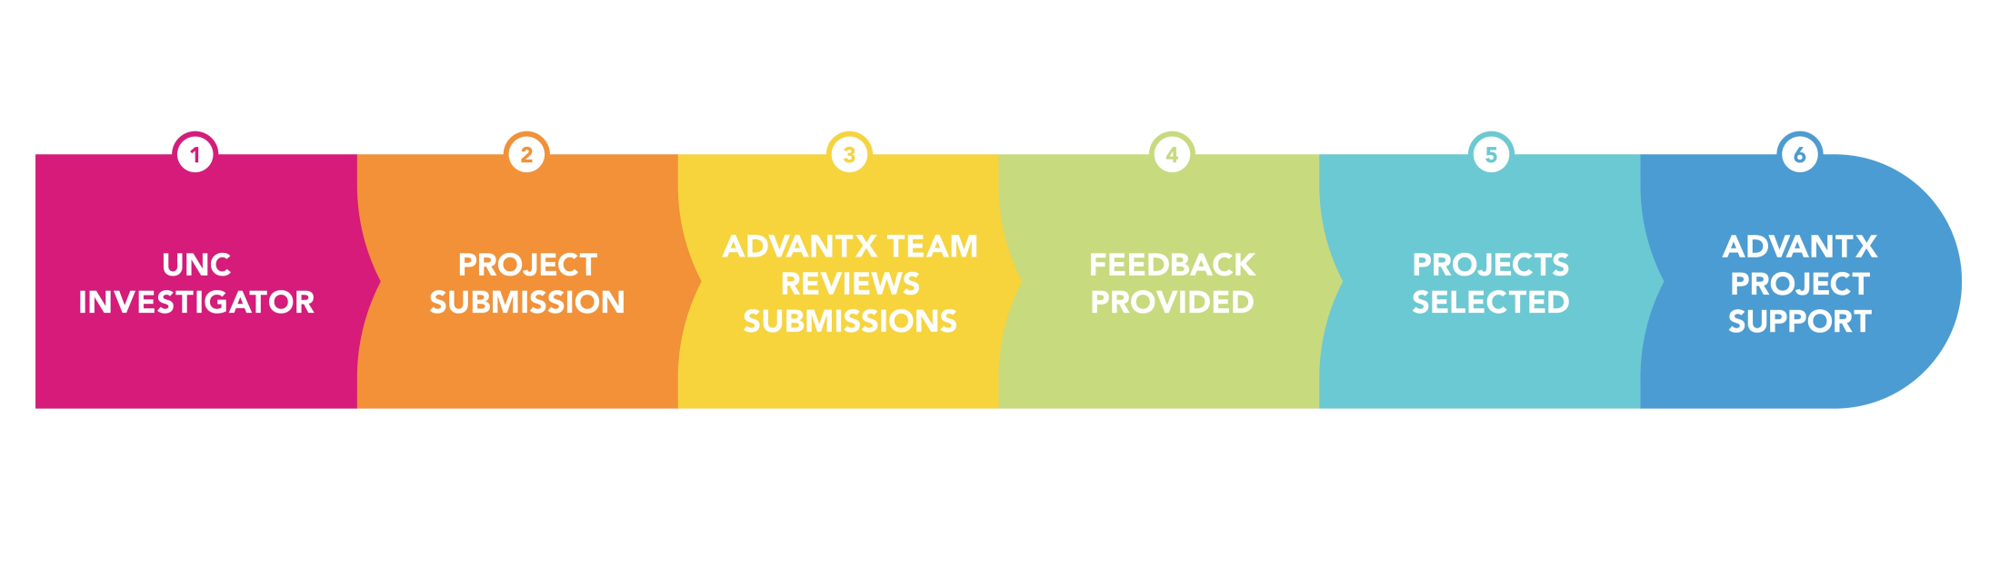 1. UNC Investigator; 2. Project Submission; 3. AdvanTX Team Reviews Submissions; 4. Feedback Provided; 5. Projects Selected; 6. AdvanTX Project Support